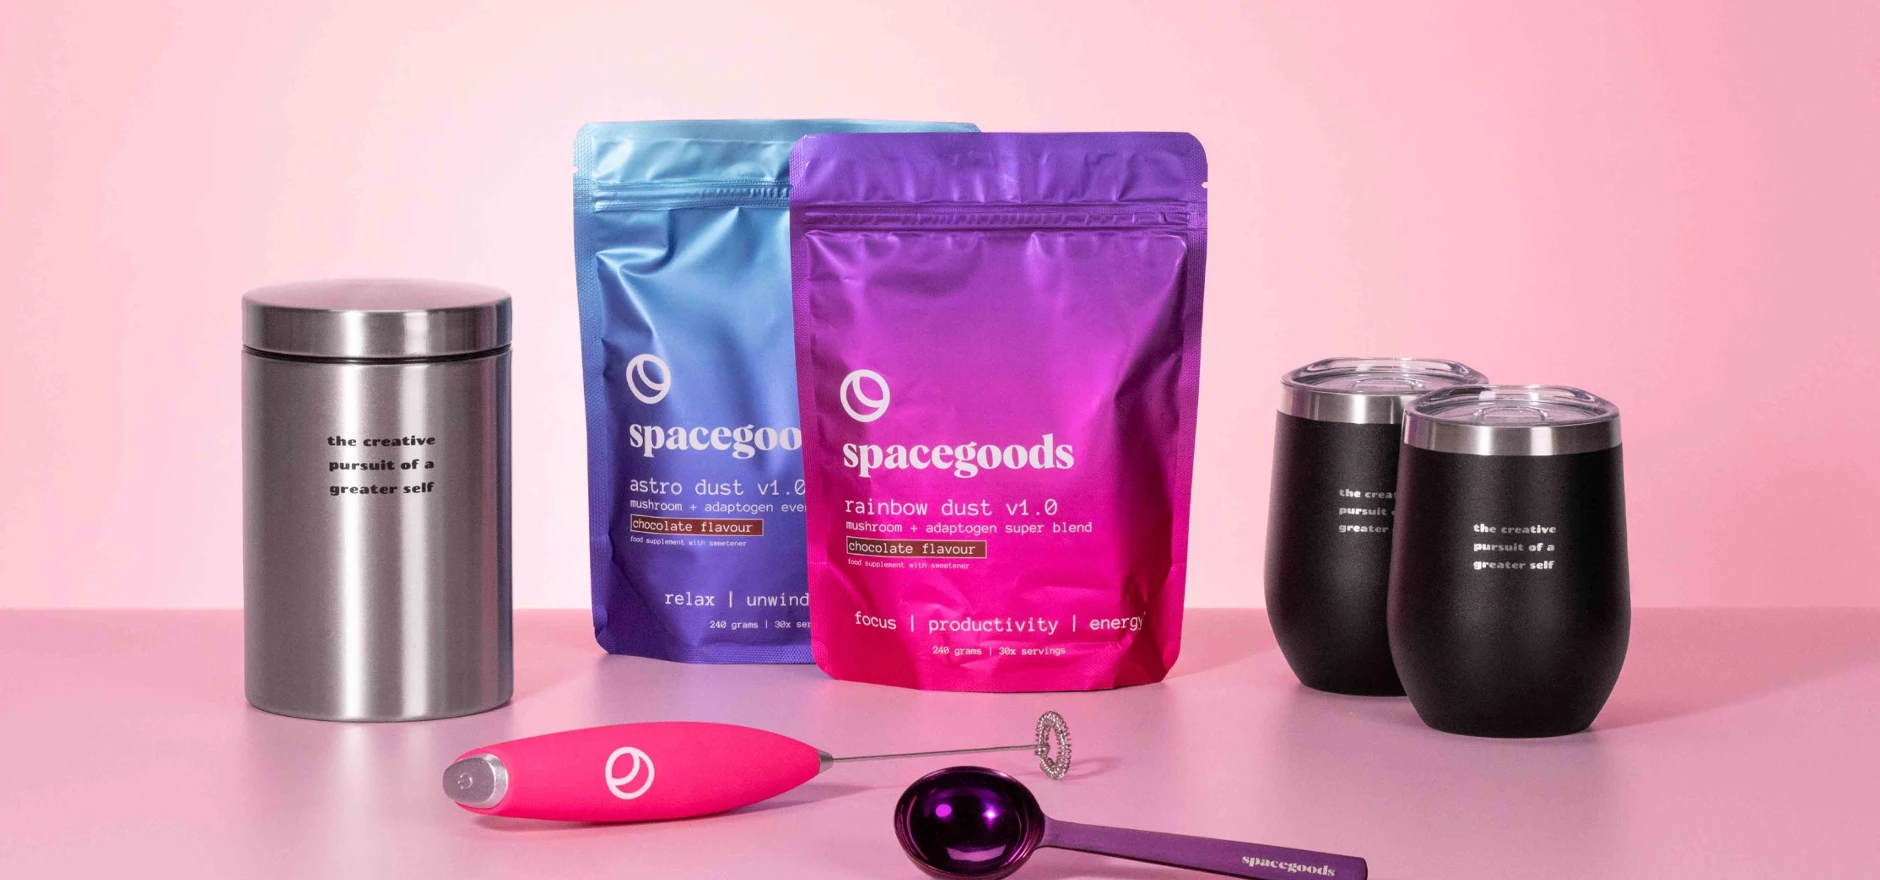 Spacegoods products